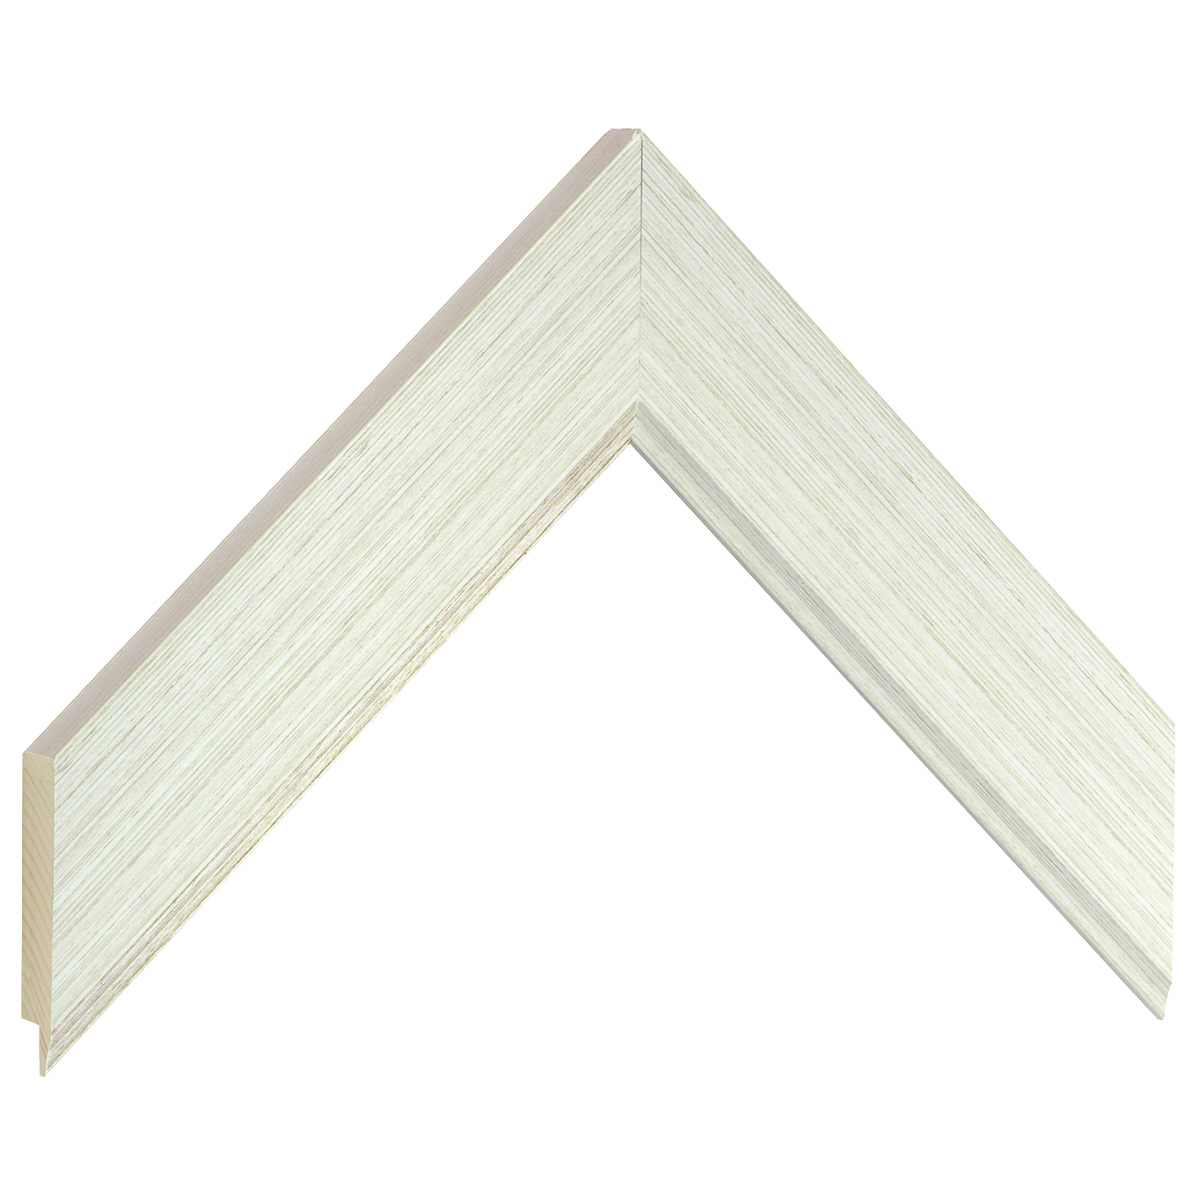 Liner finger-jointed pine 38mm - Cream, wired texture - Sample